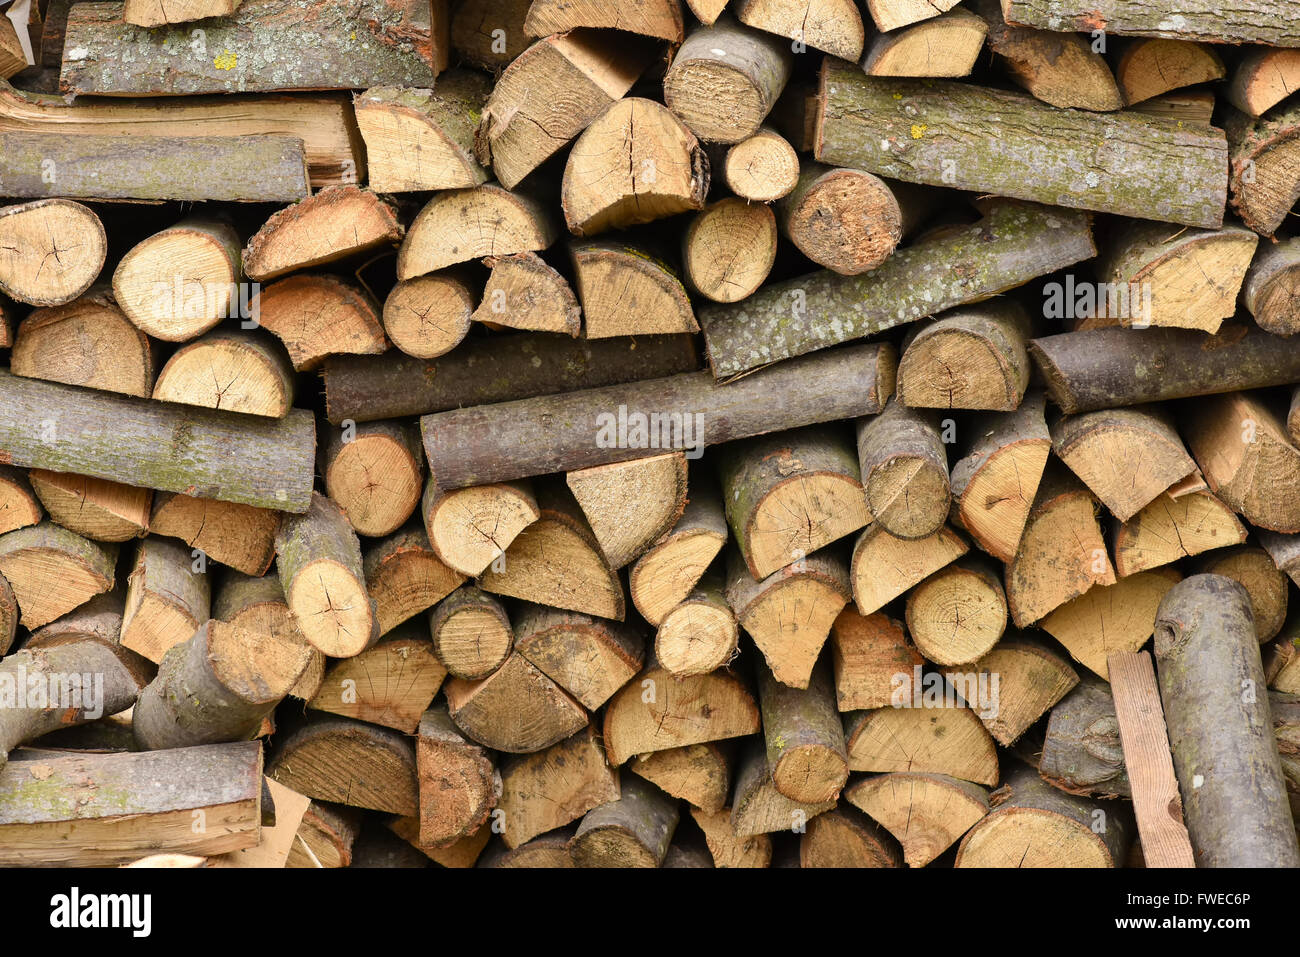 A pile of firewood stacked in natural light Stock Photo